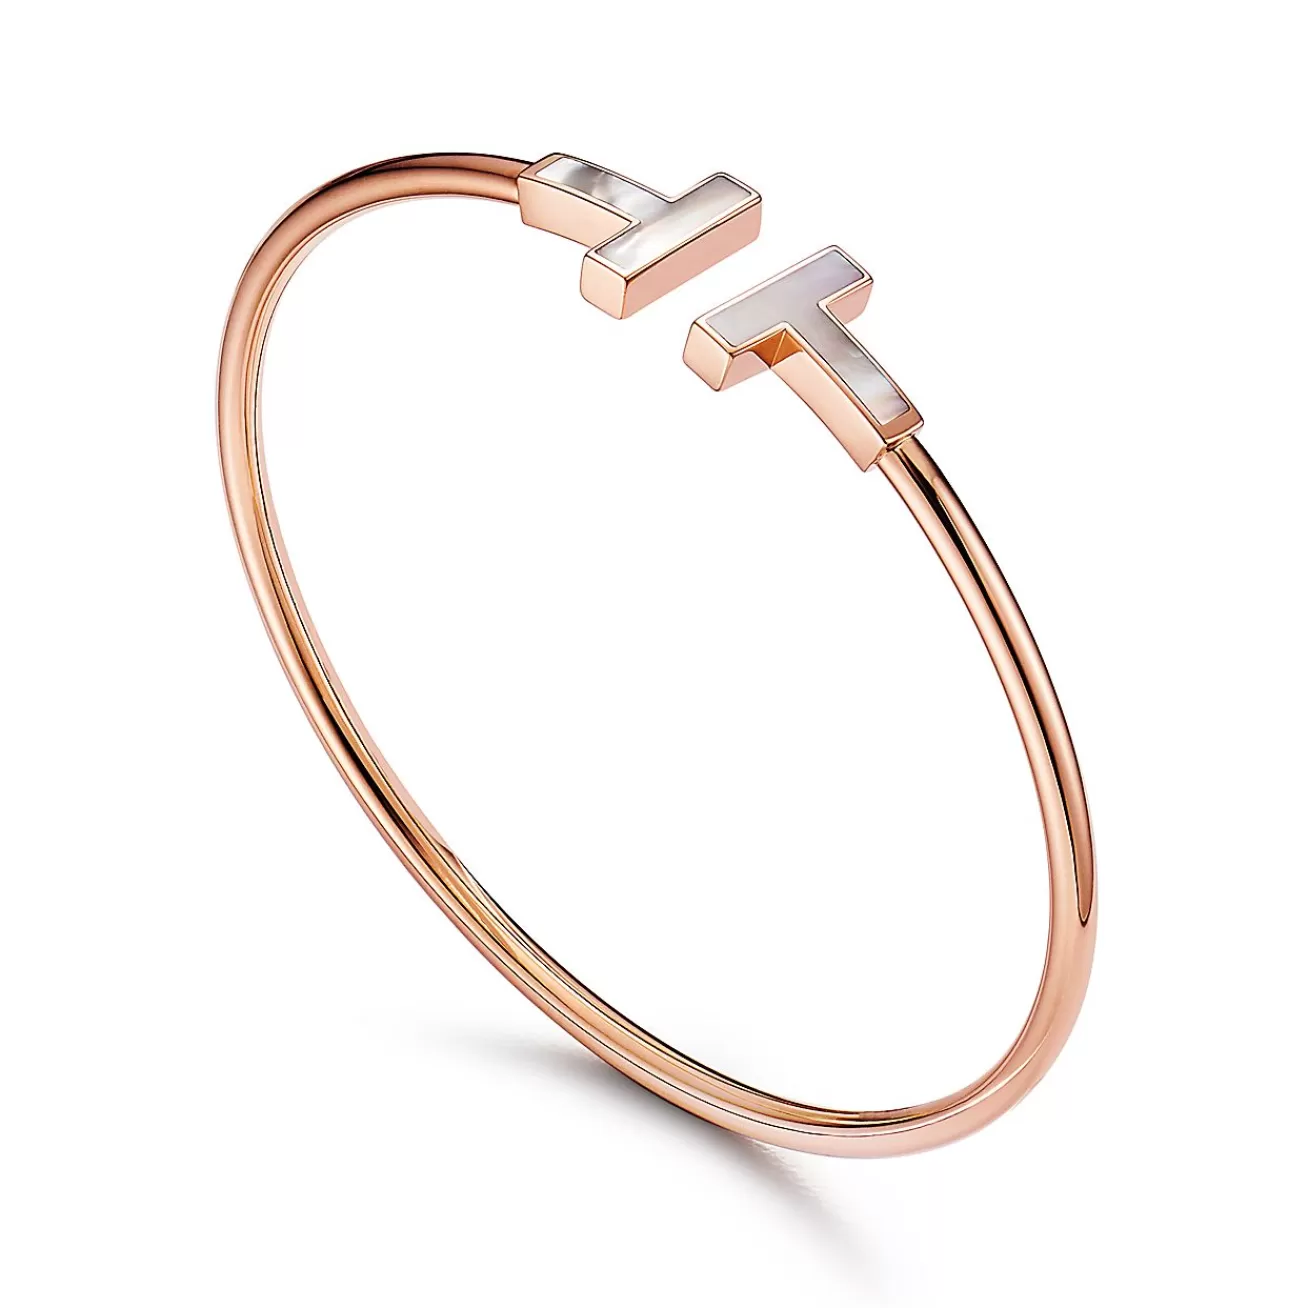 Tiffany & Co. Tiffany T Wire Bracelet in Rose Gold with Mother-of-pearl | ^ Bracelets | Gifts for Her